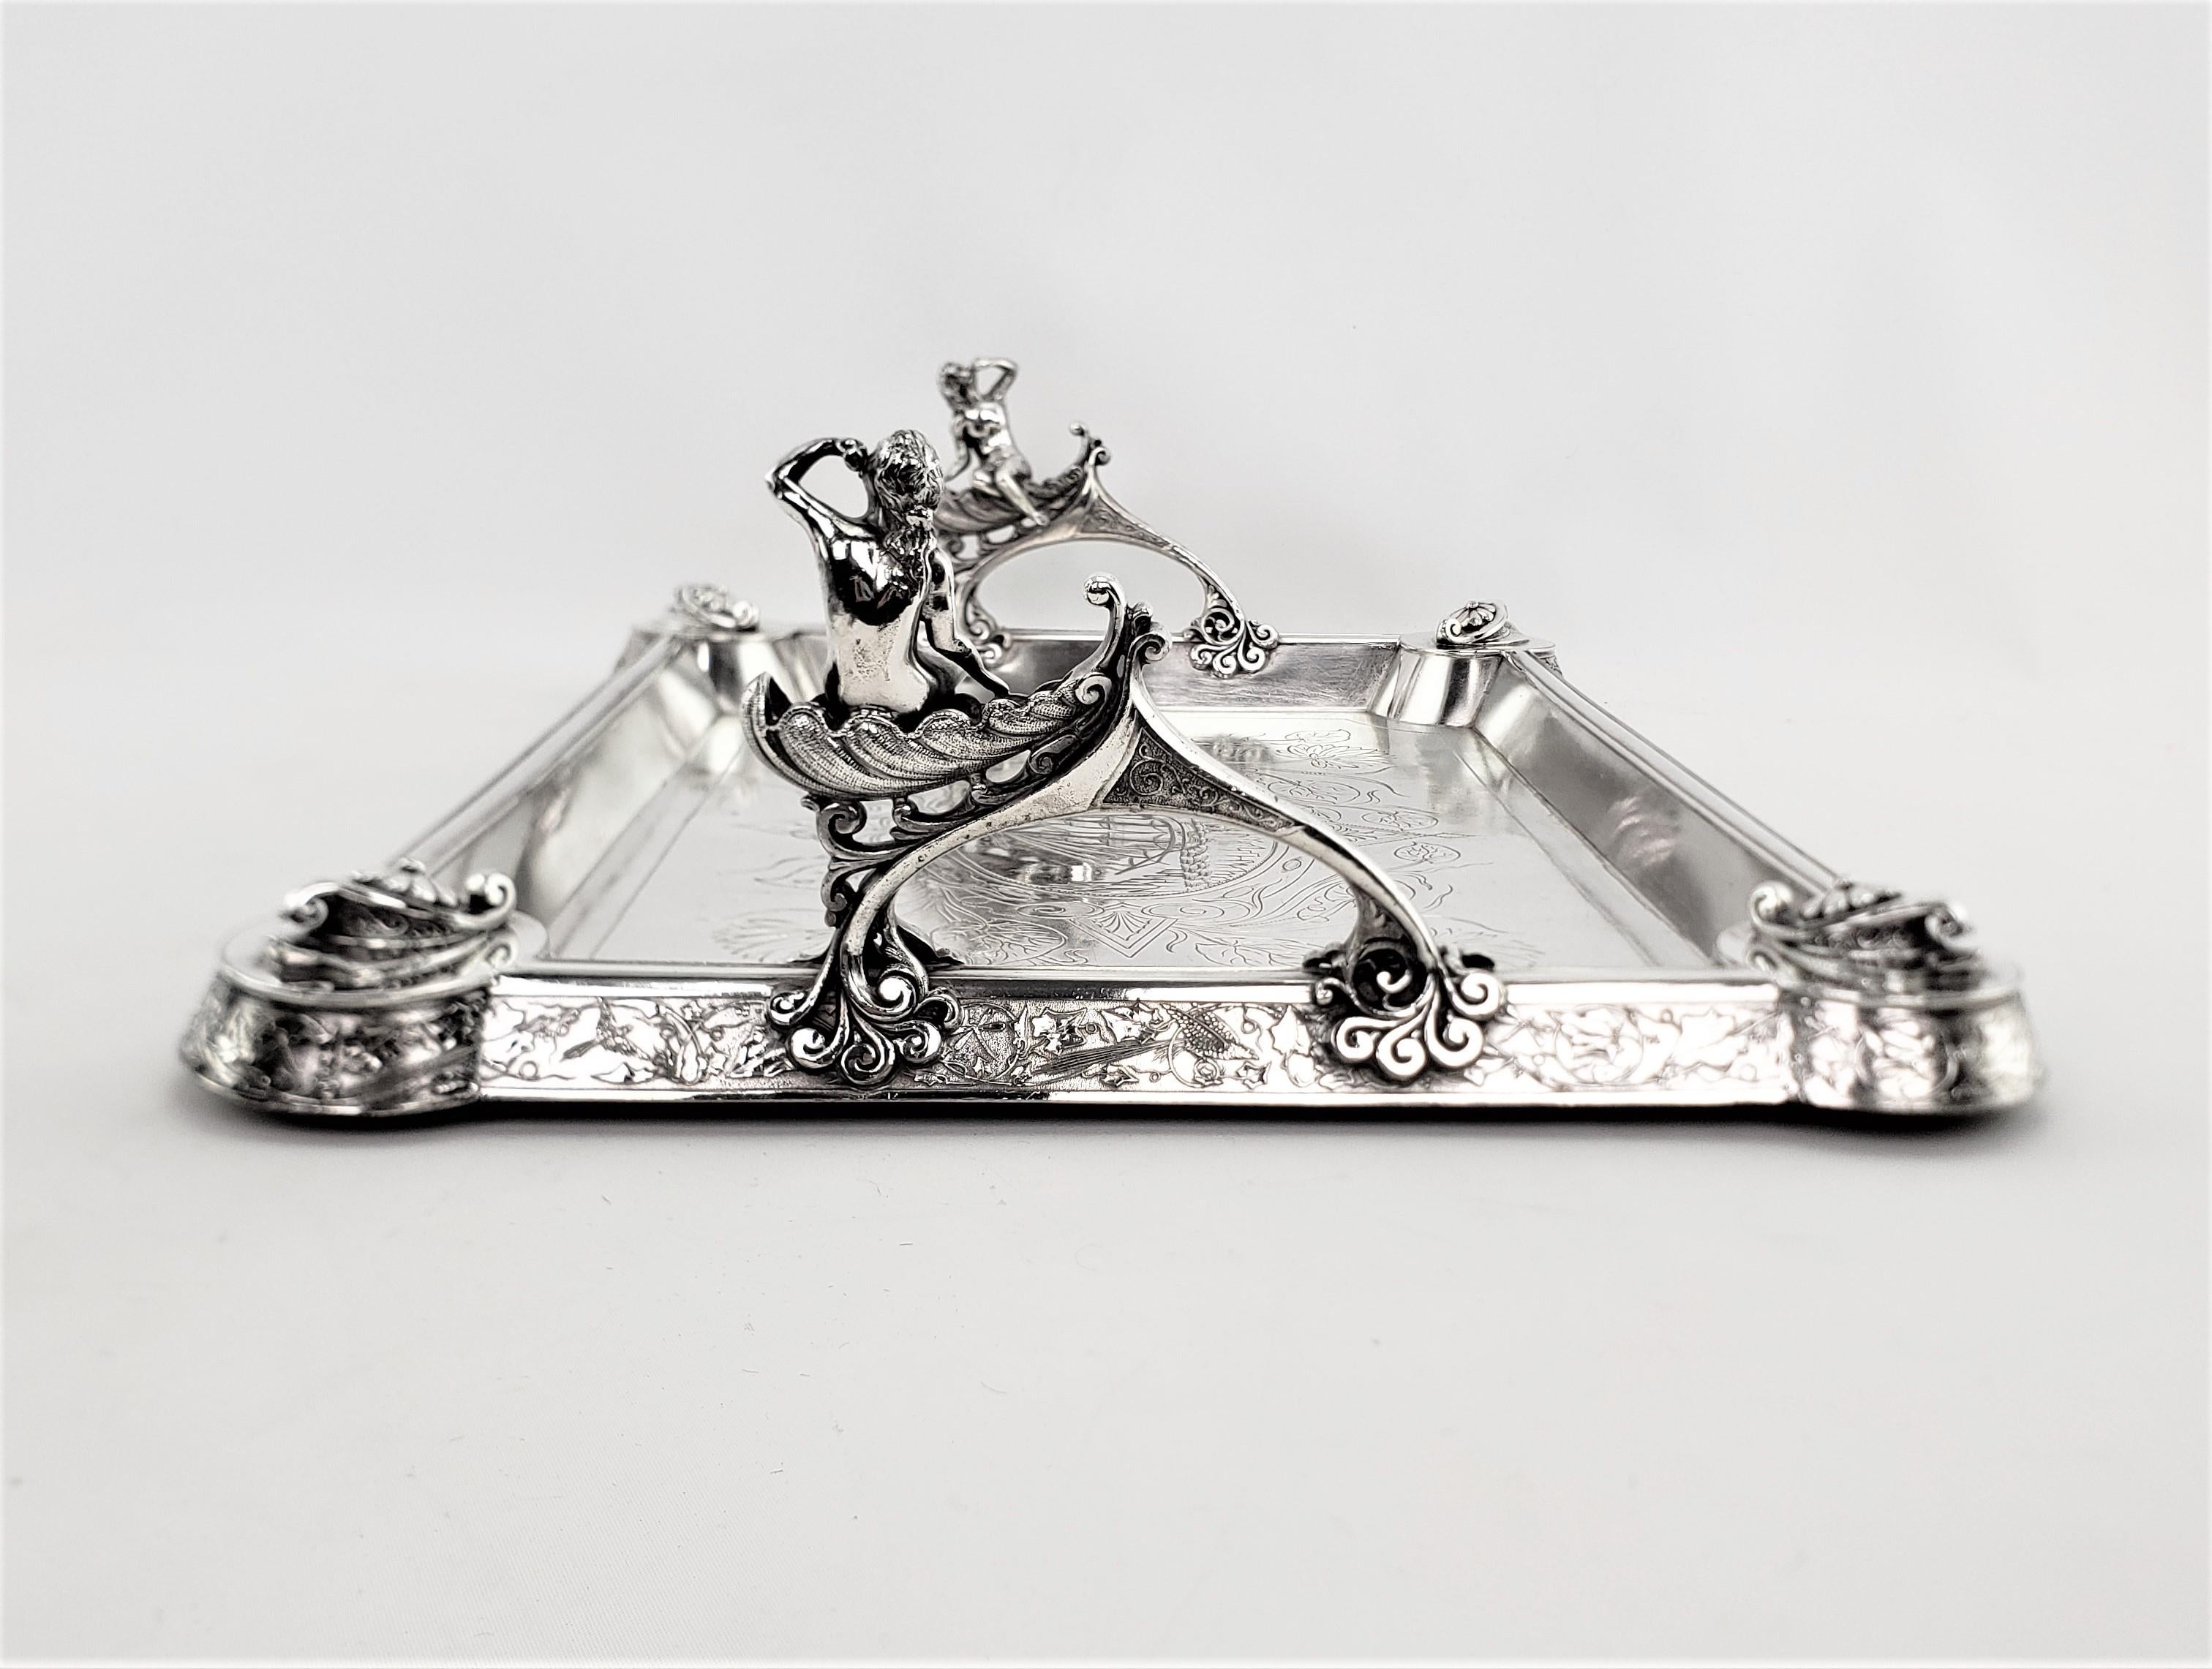 19th Century Antique Aesthetic Movement Silver Plated Serving Tray with Figural Siren Handles For Sale